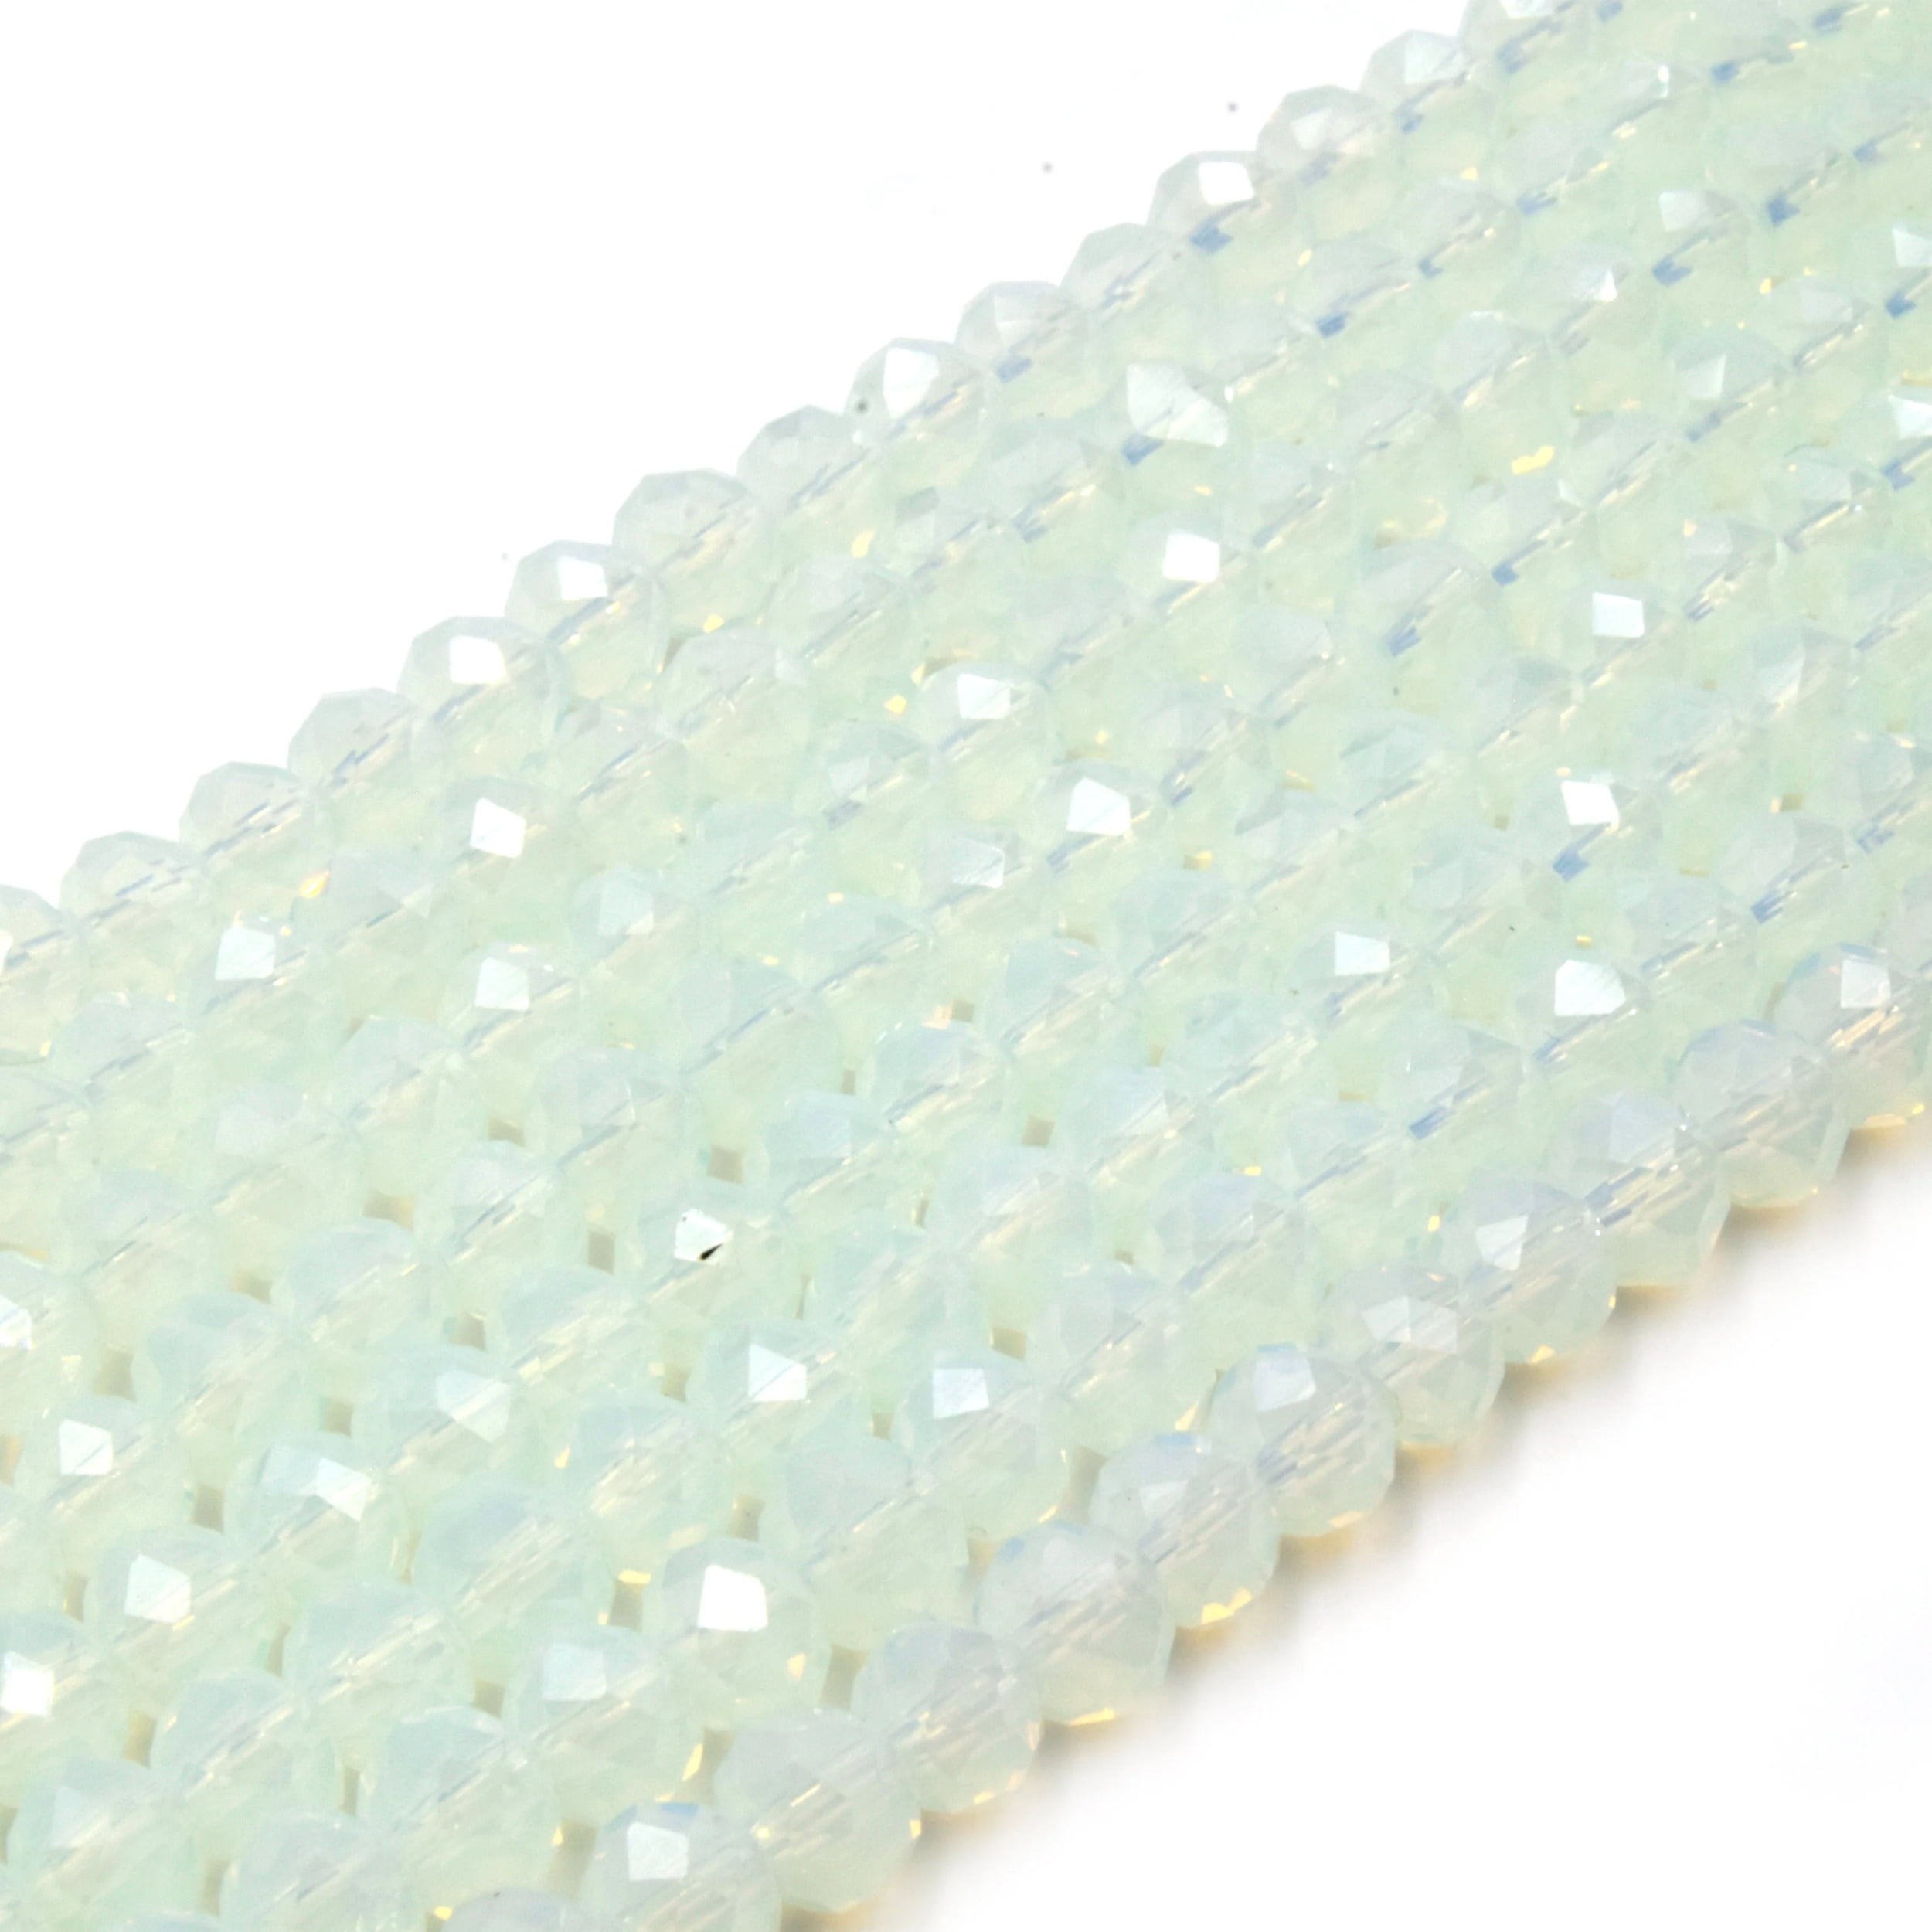 China Factory Plastic Bead Design Boards for Necklace Design, Flocking,  Rectangle, with Round Opaque Acrylic Beads, Elastic Crystal Thread, for DIY  Jewelry Crafts Making Beads: 6mm, Hole: 2mm in bulk online 